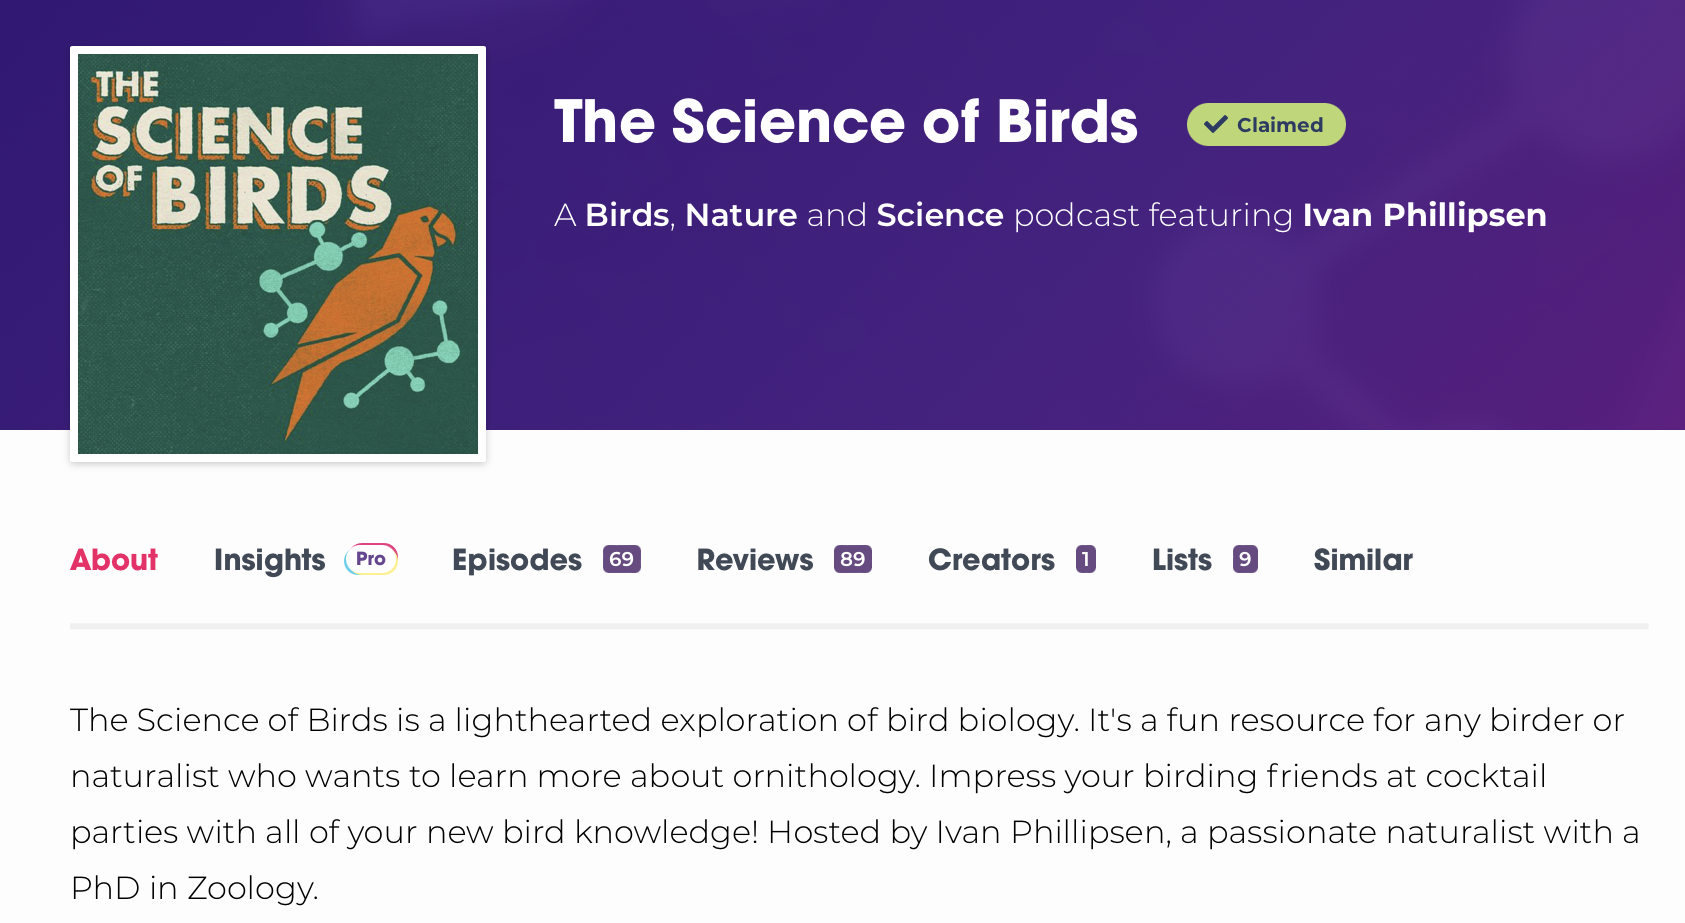 A podcast description that shows readers what they can gain from the show.